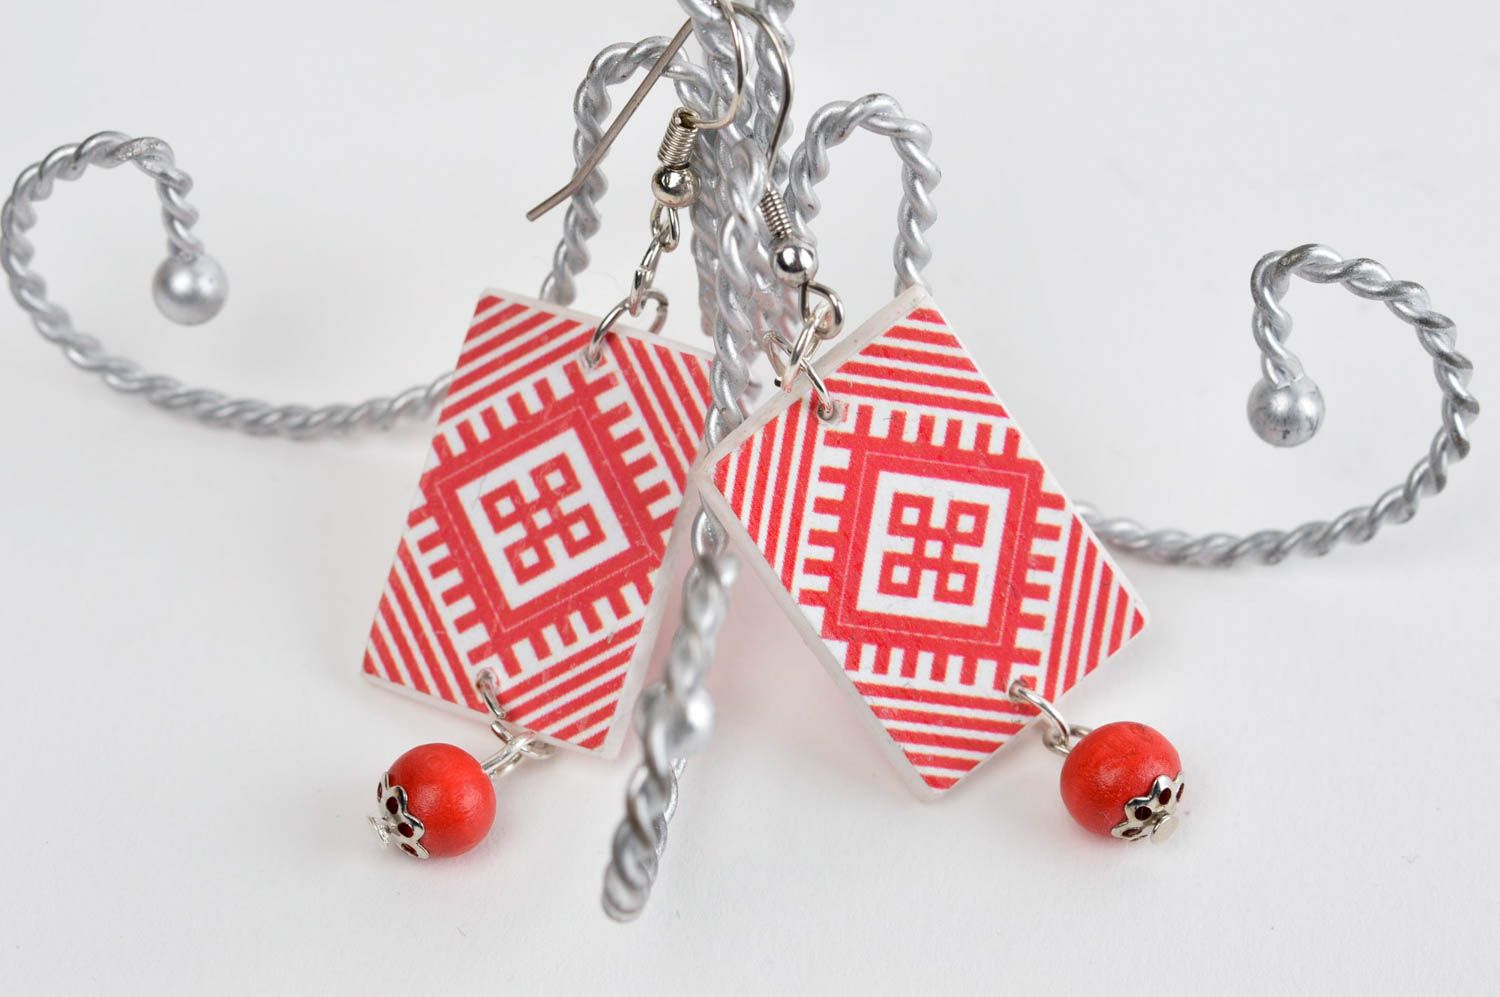 Unusual handmade wooden earrings accessories for girls fashion trends gift ideas photo 1